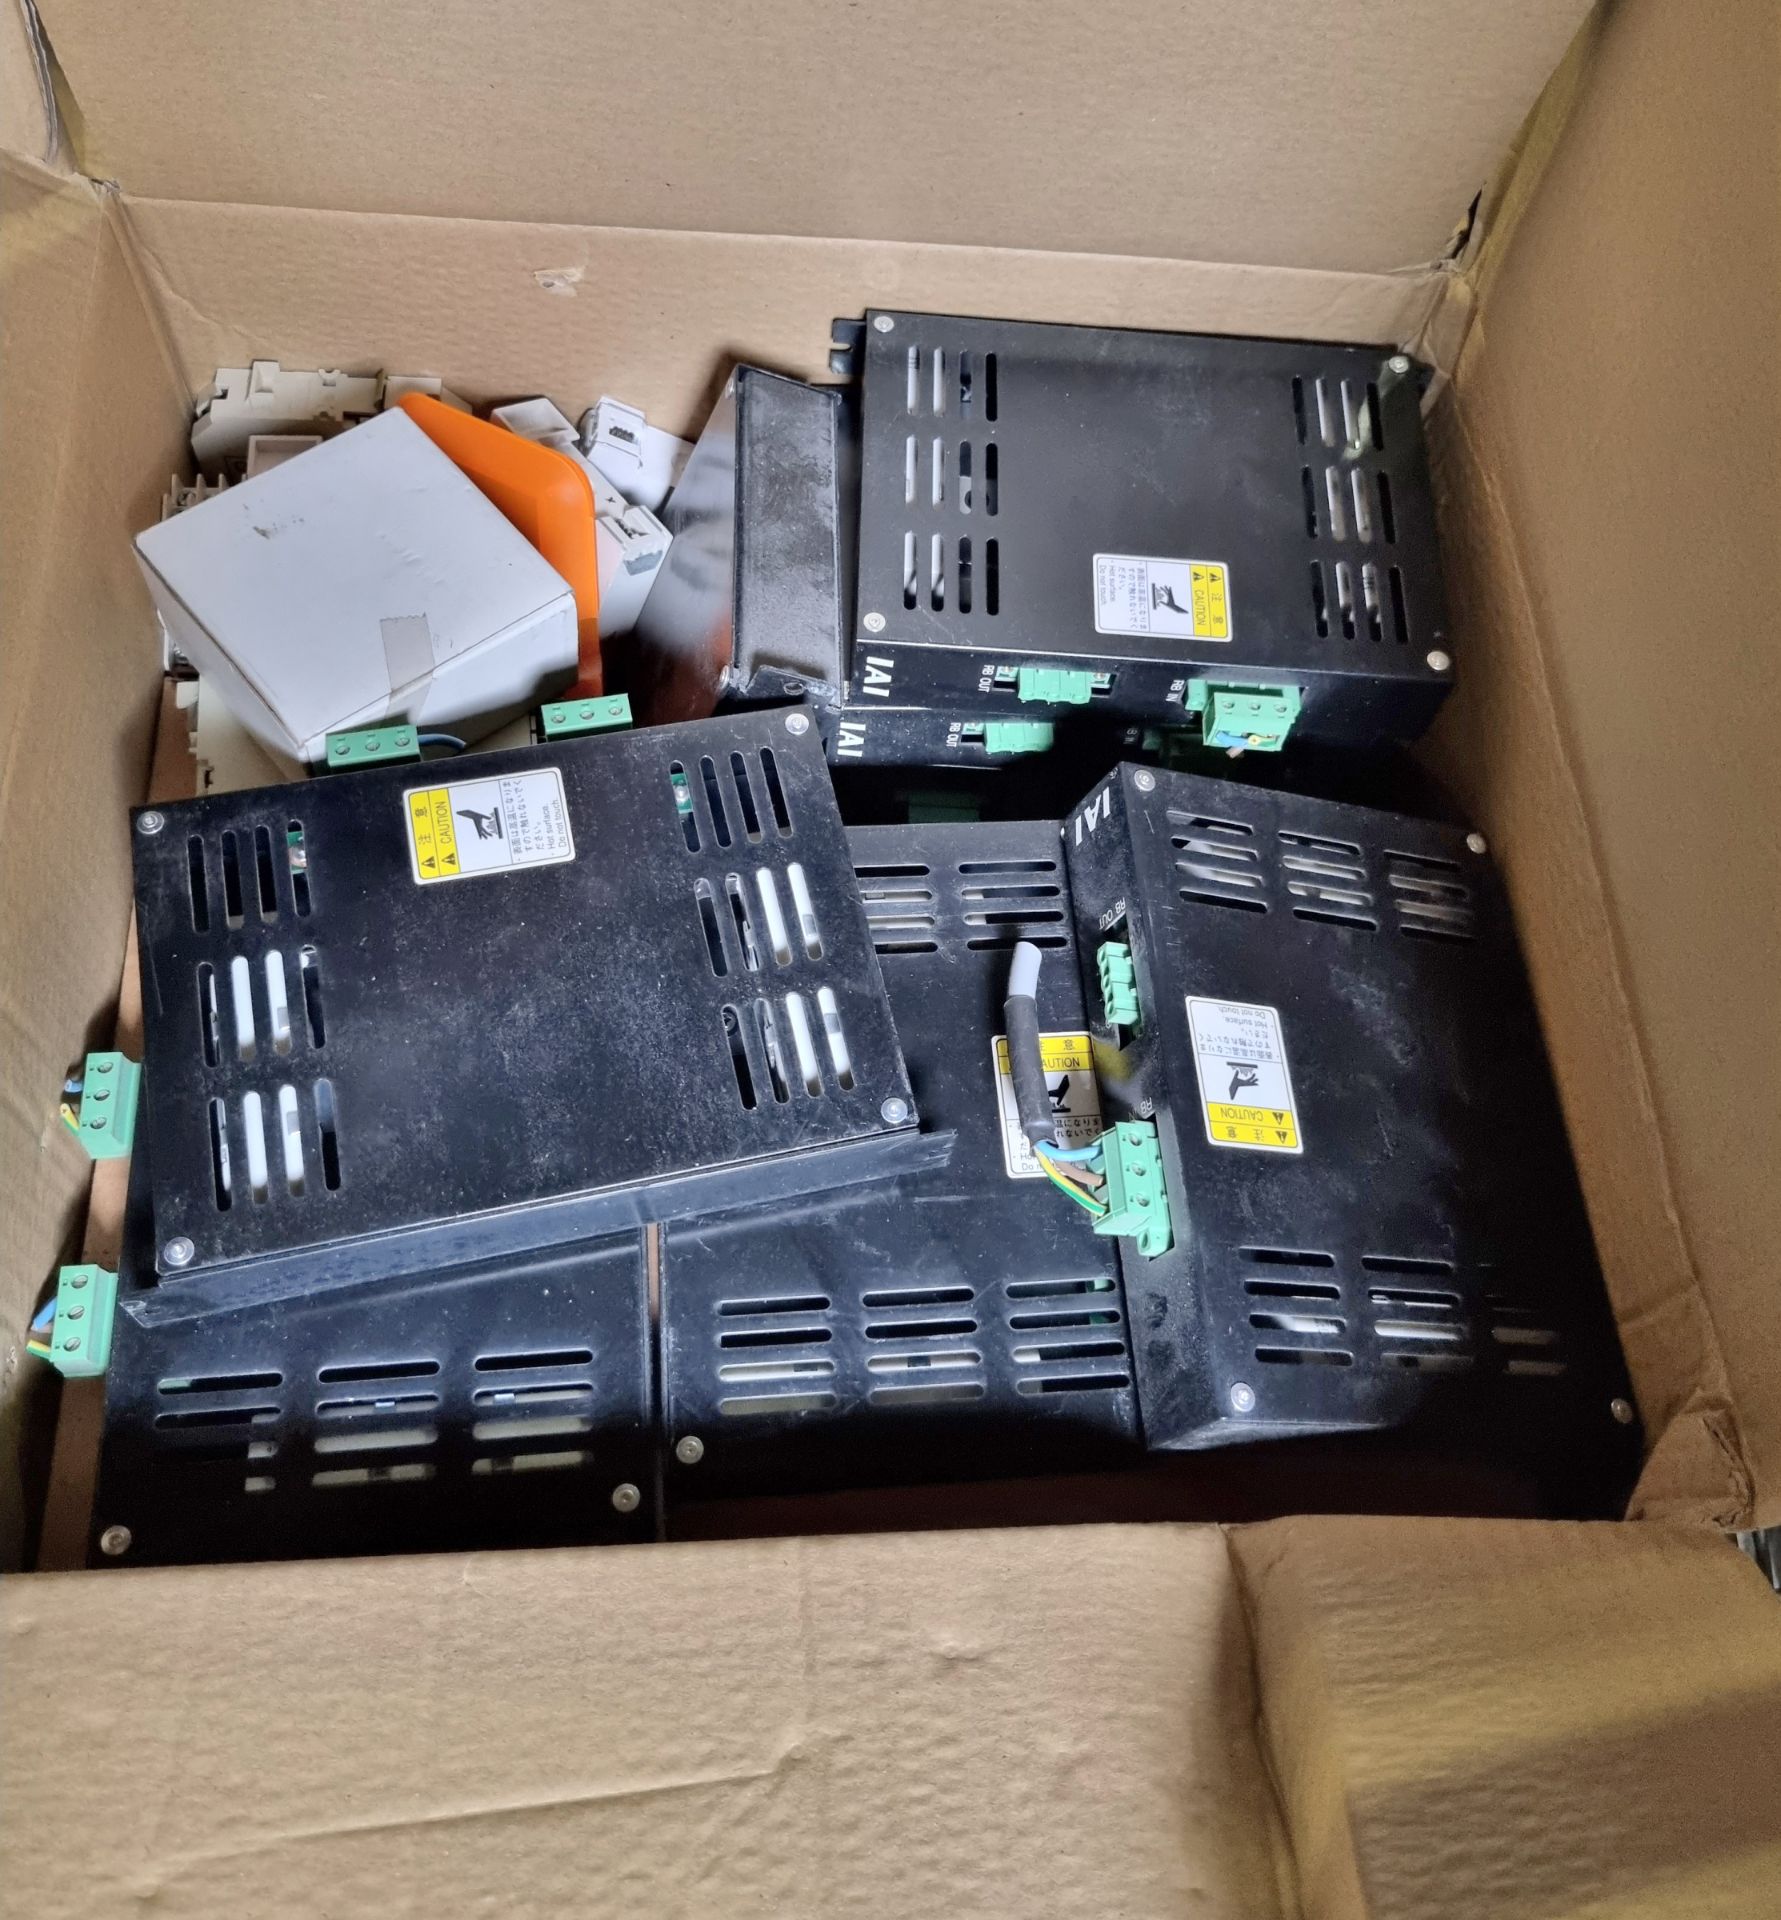 6x boxes of electrical spares - junction boxes - mixed sized switches - circuit boards - Image 3 of 4